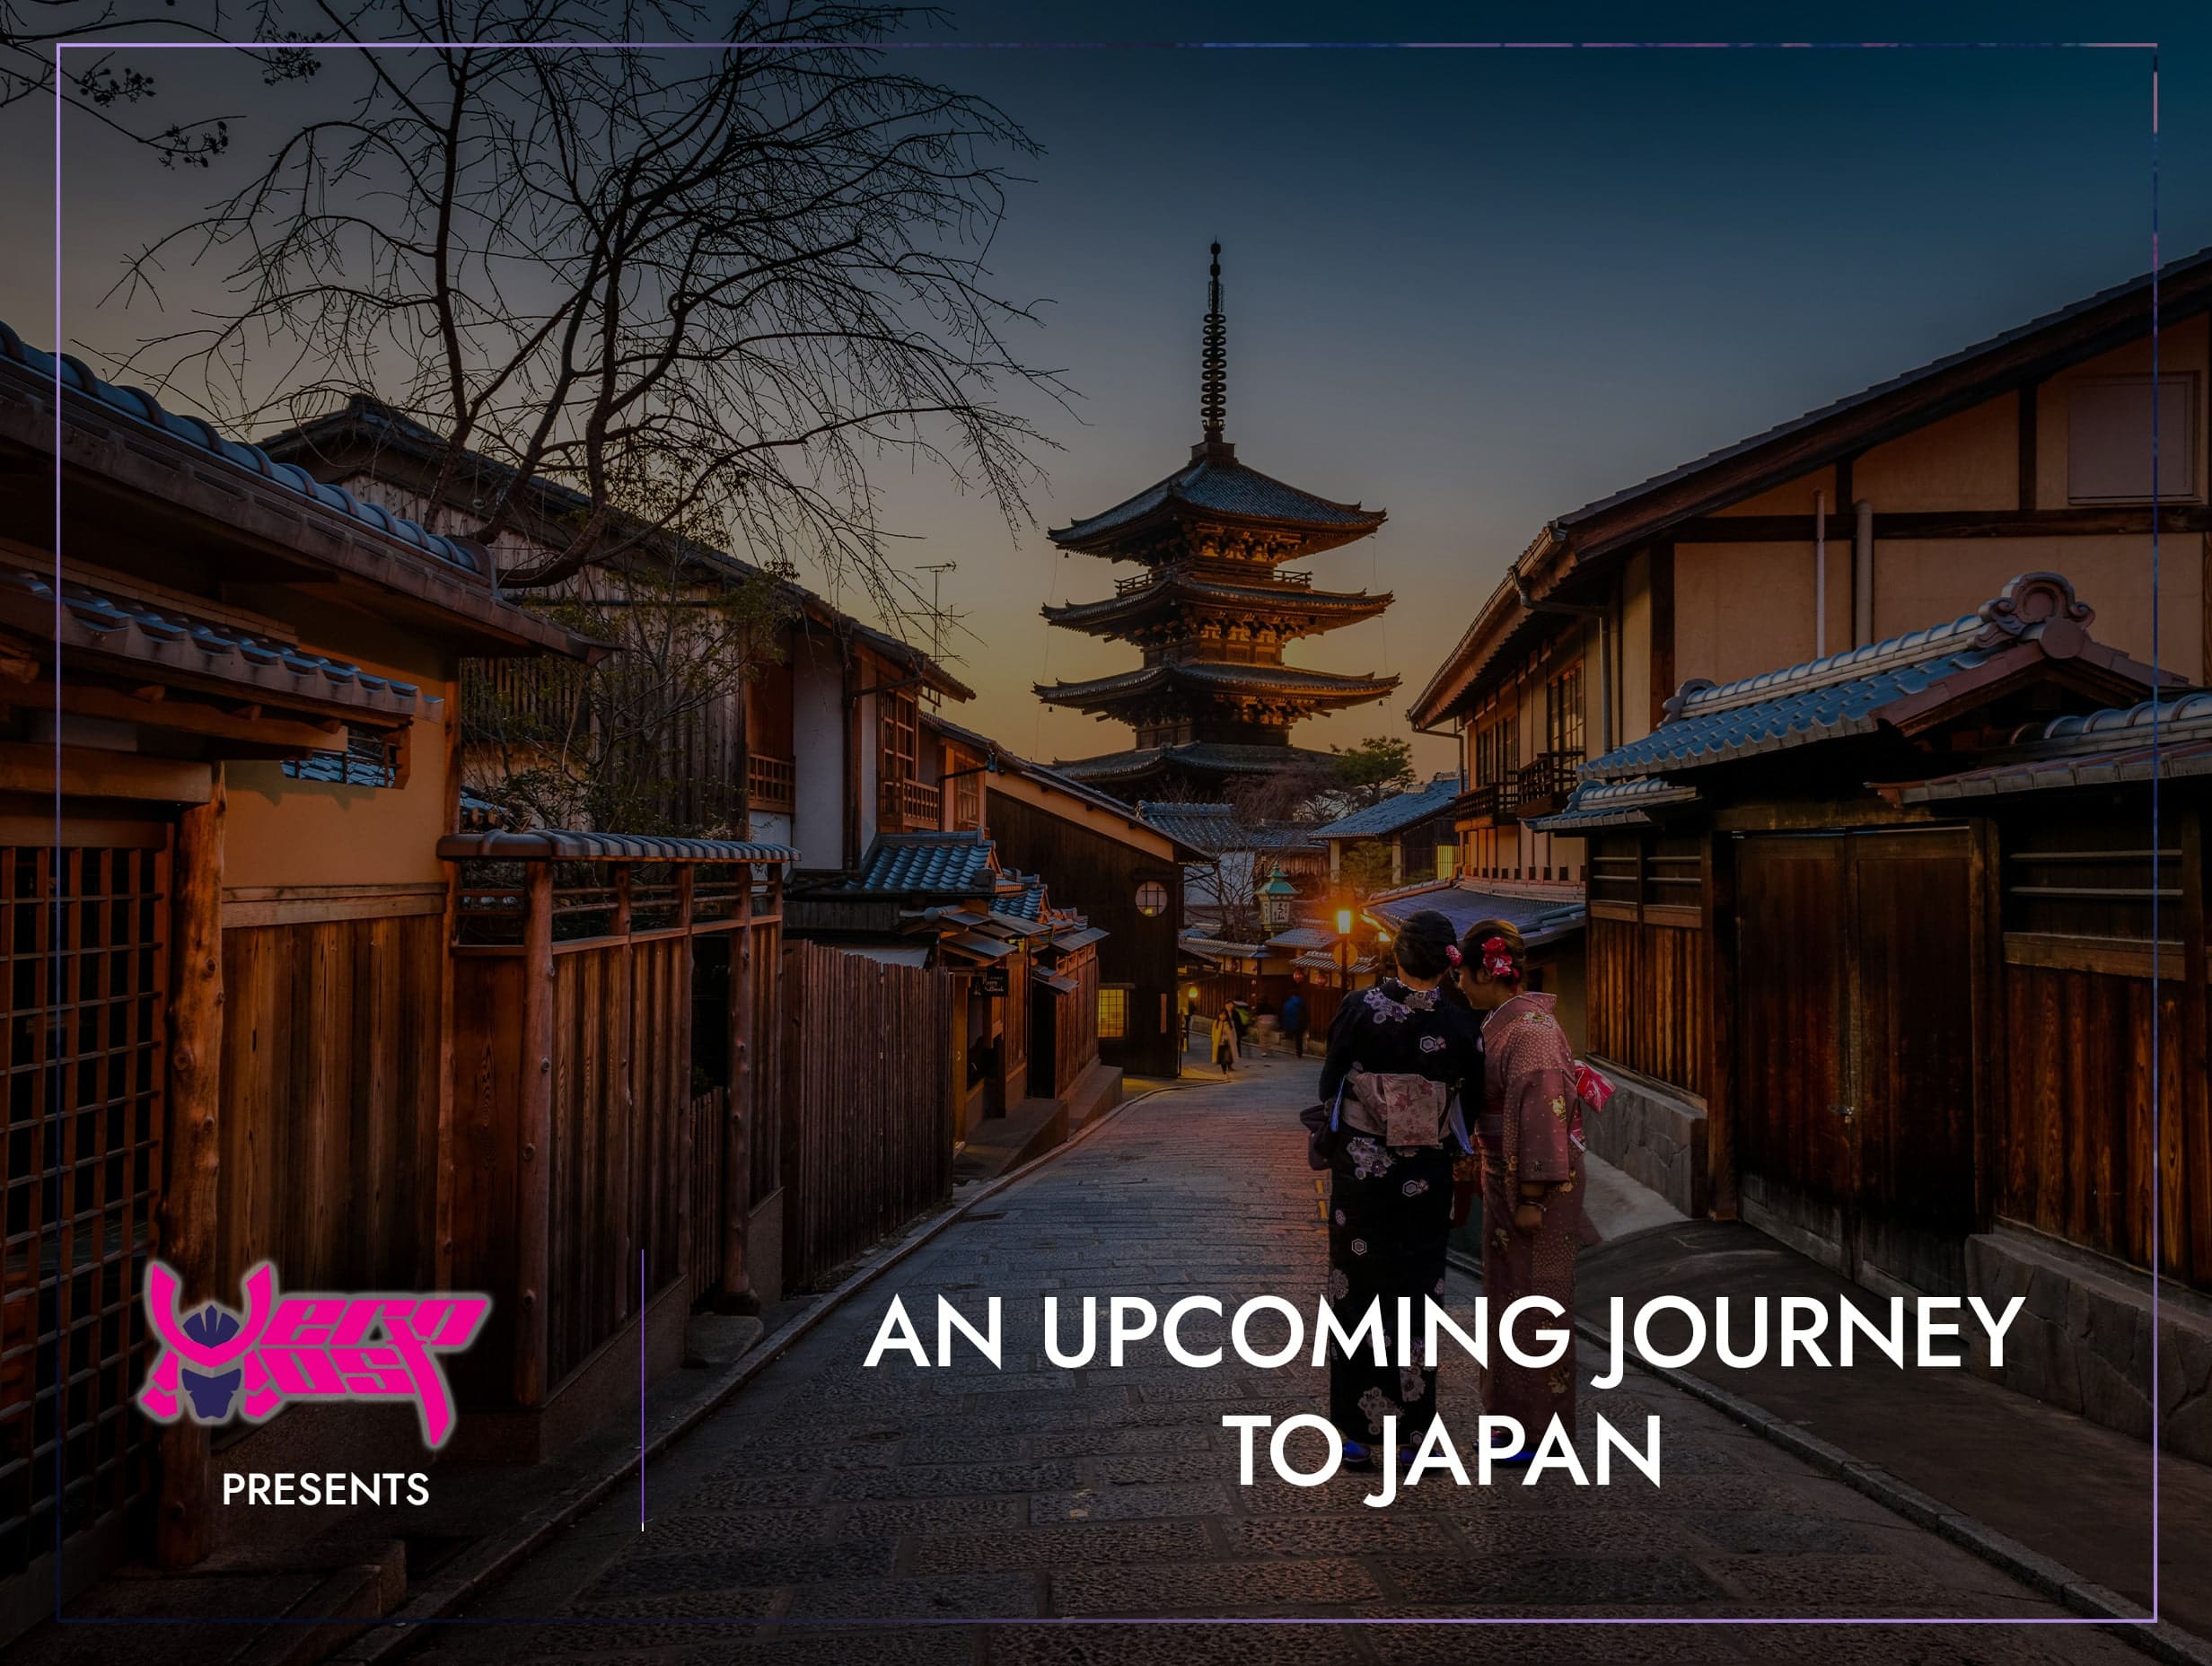 An Upcoming journey to Japan